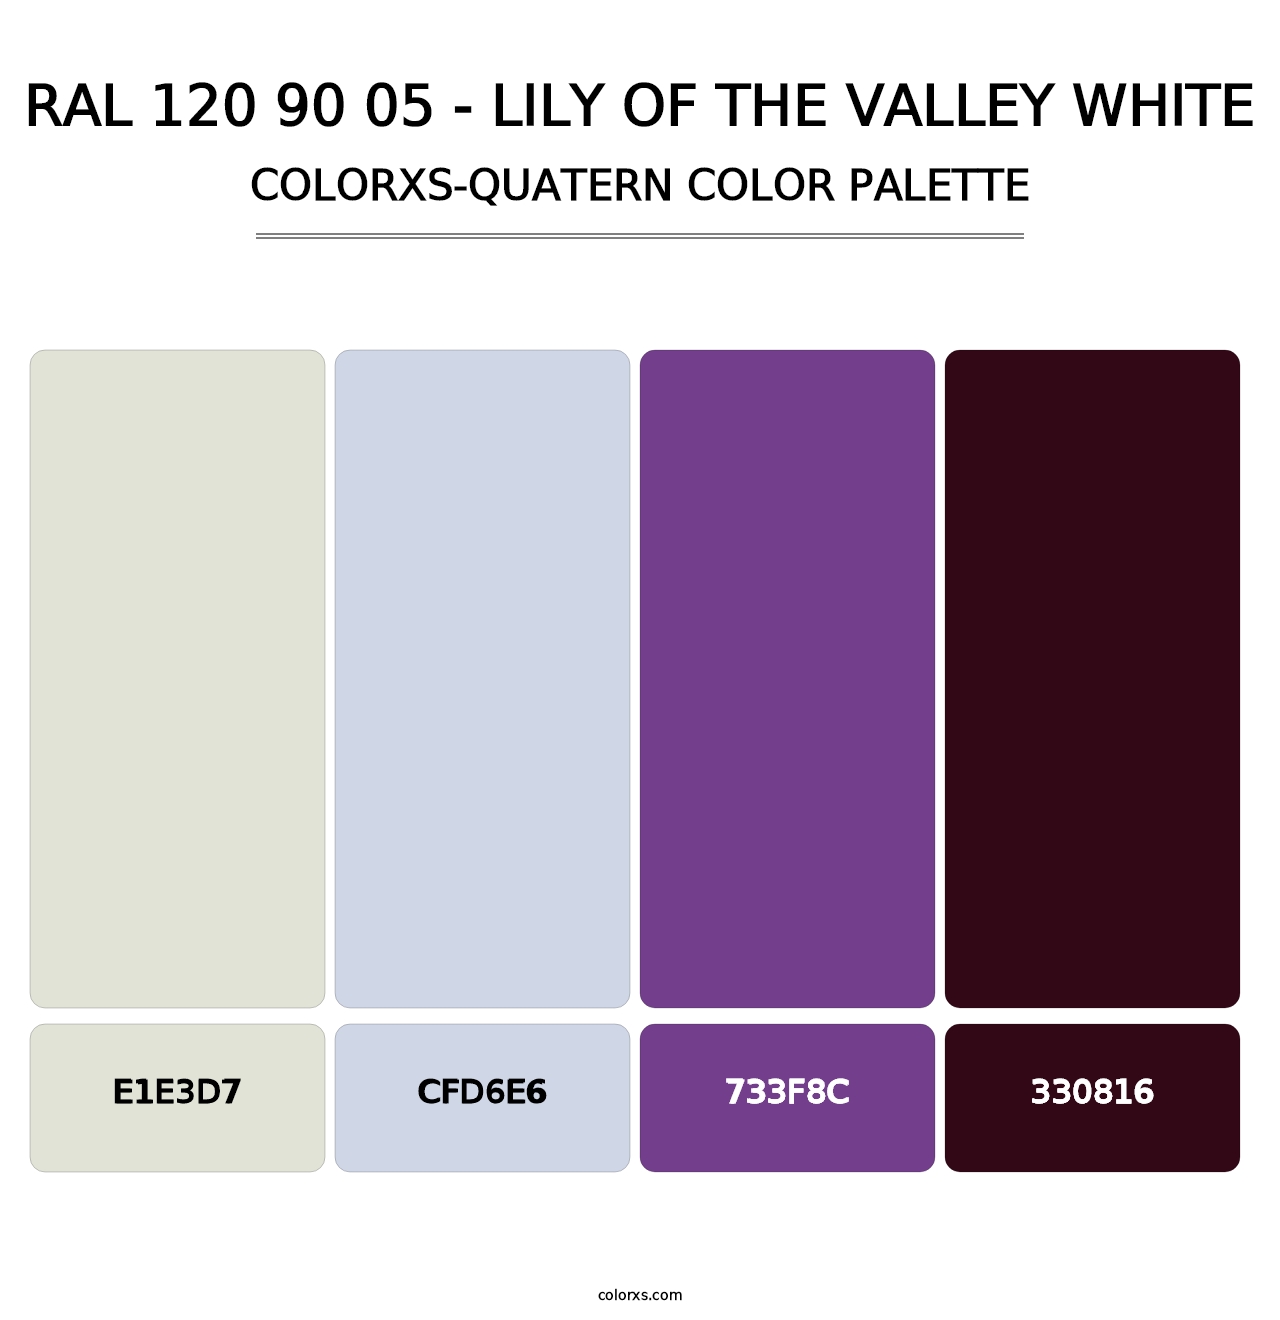 RAL 120 90 05 - Lily of the Valley White - Colorxs Quatern Palette